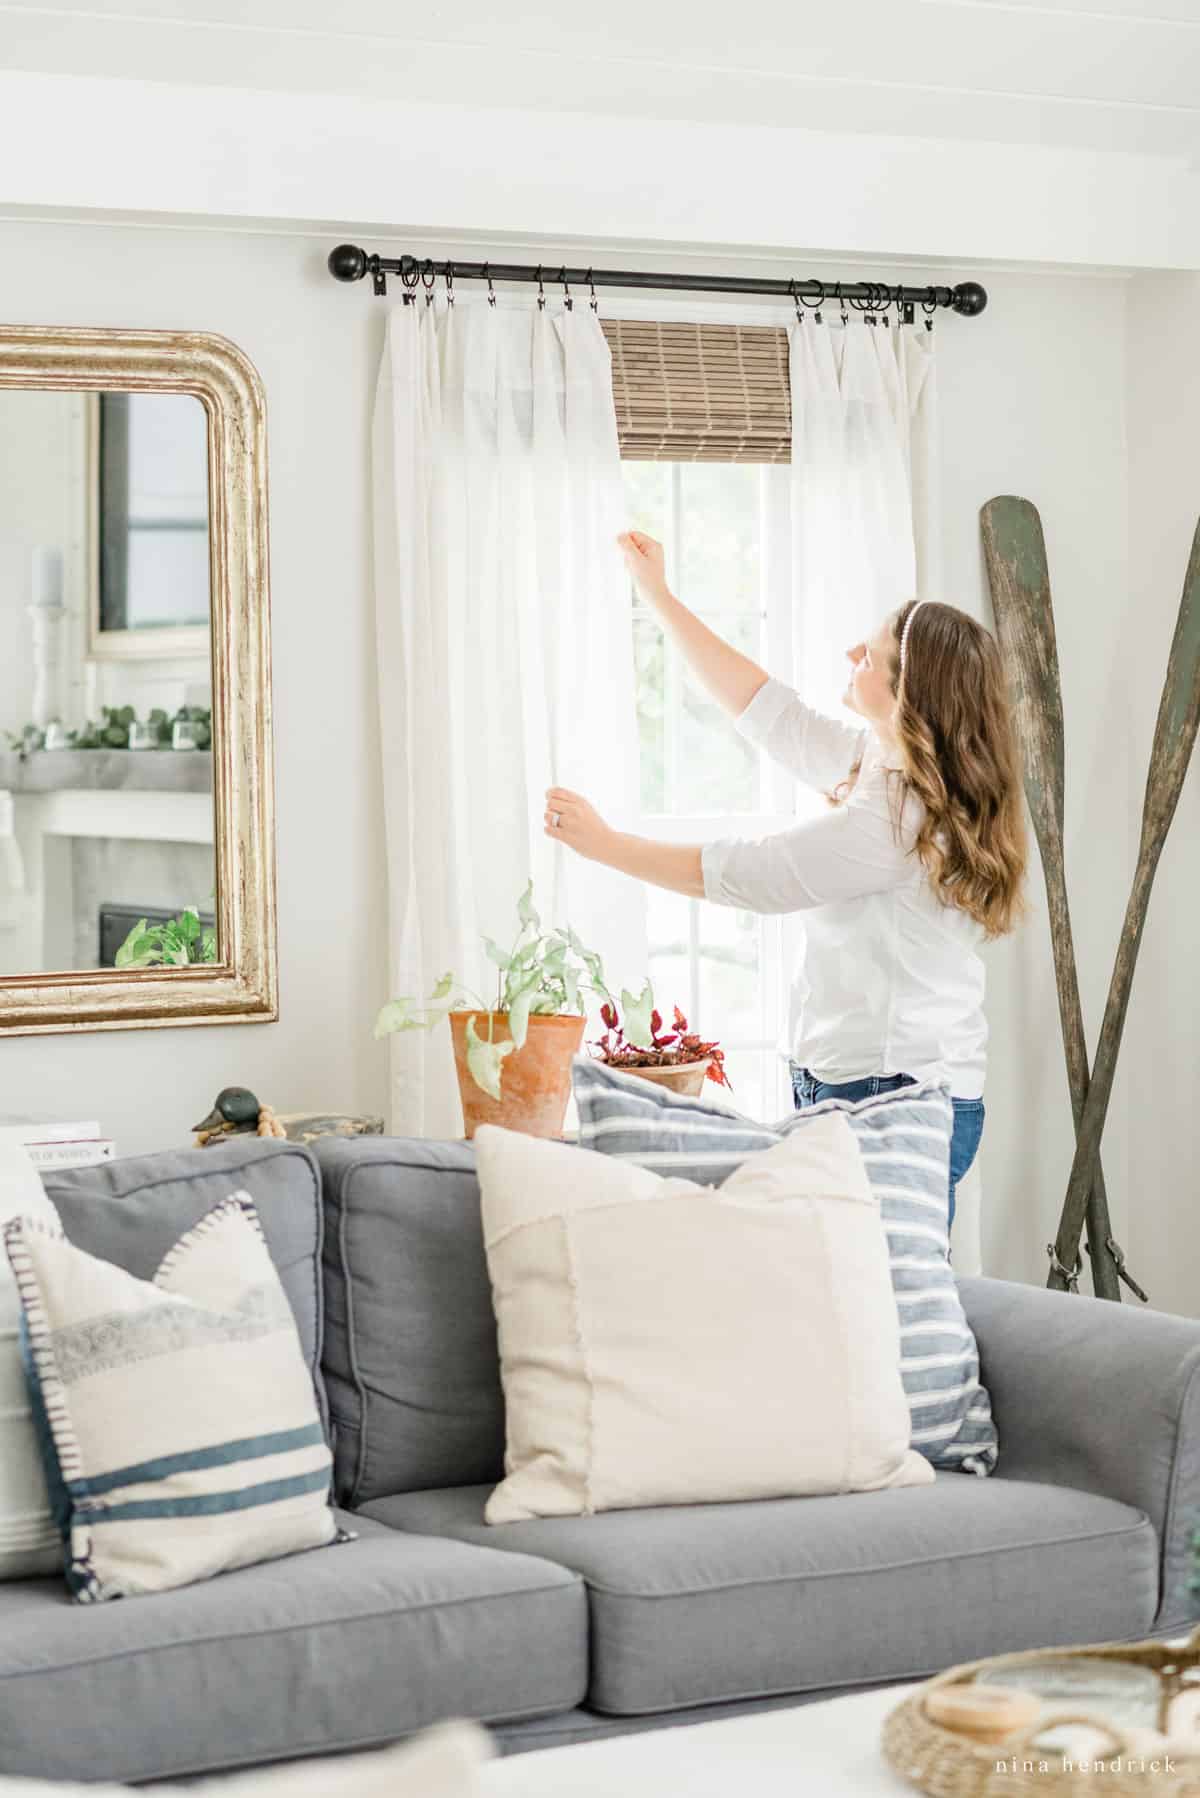 inexpensive window treatments: a guide of stylish options